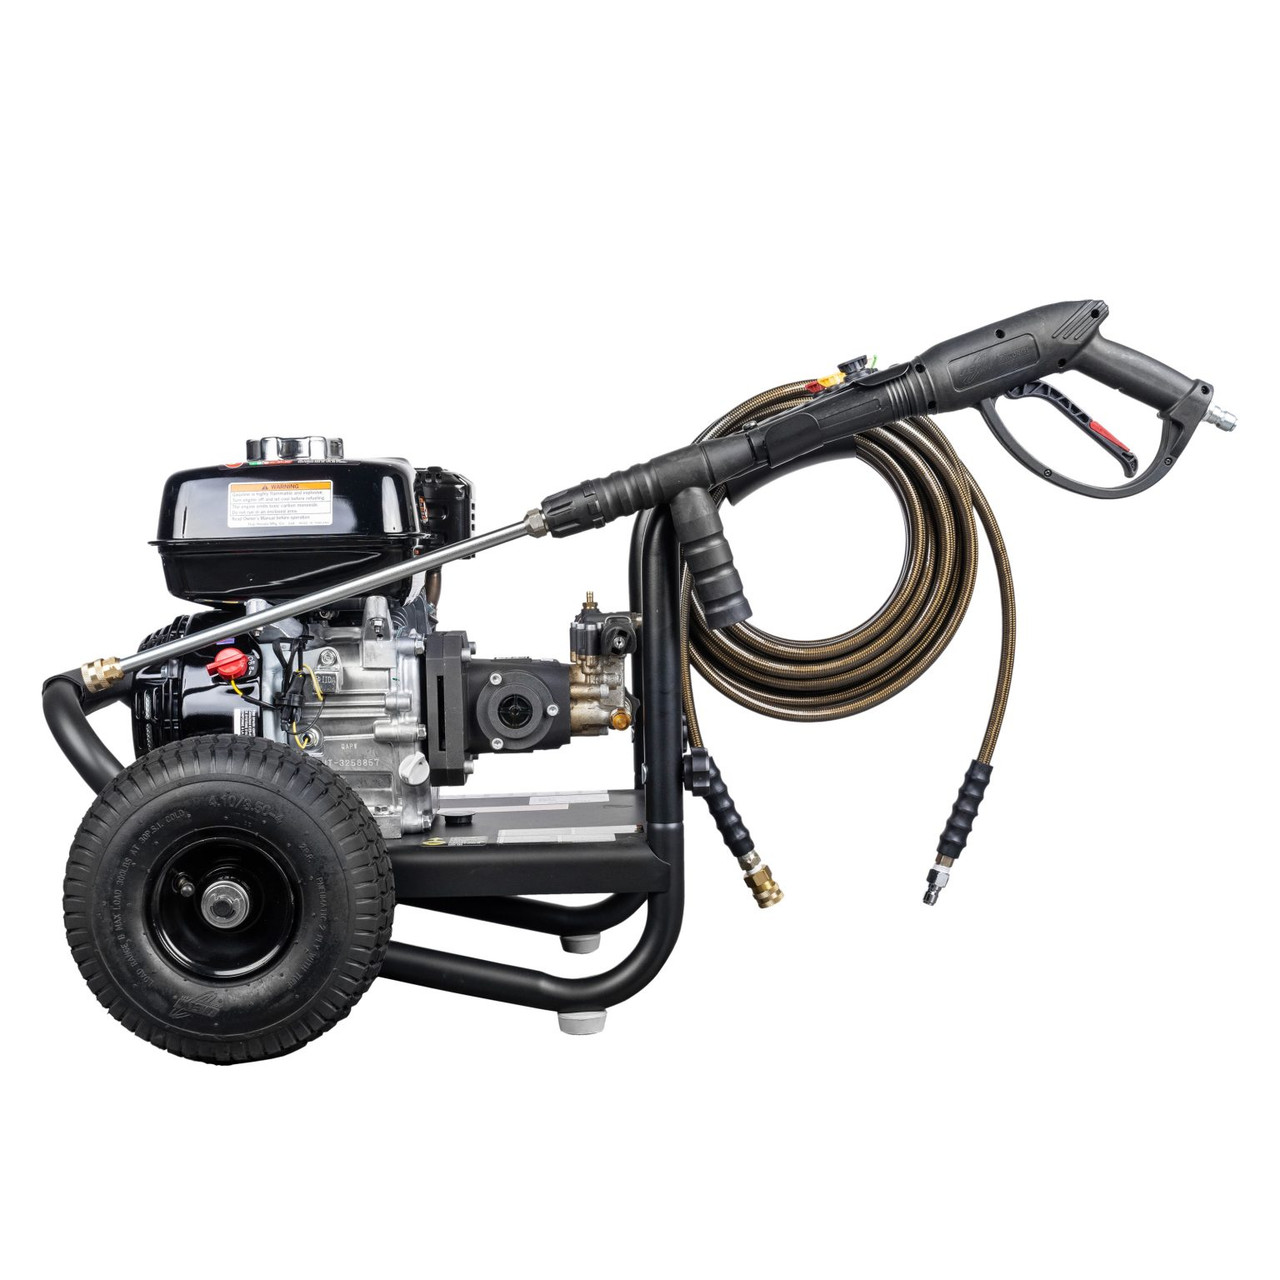 3000 PSI at 2.7 GPM HONDA GX200 with AAA AX300 Axial Cam Pump Cold Water Gas Professional Pressure Washer IS61022